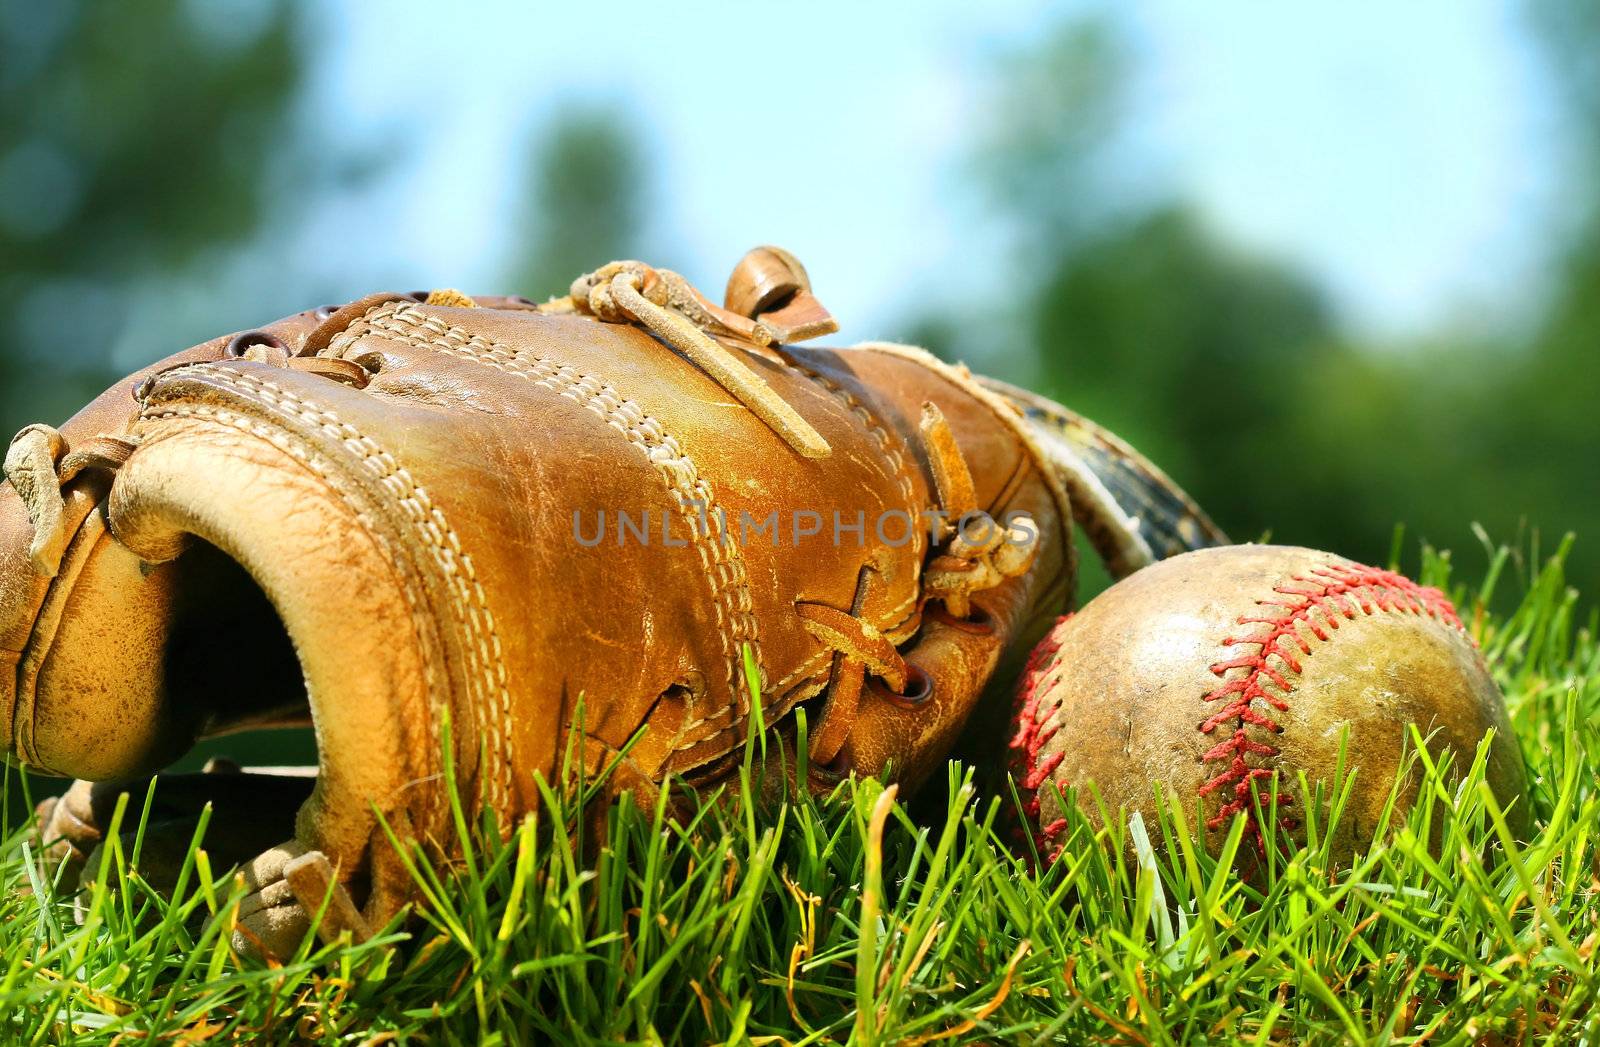 Old baseball glove and ball on the grass by Sandralise